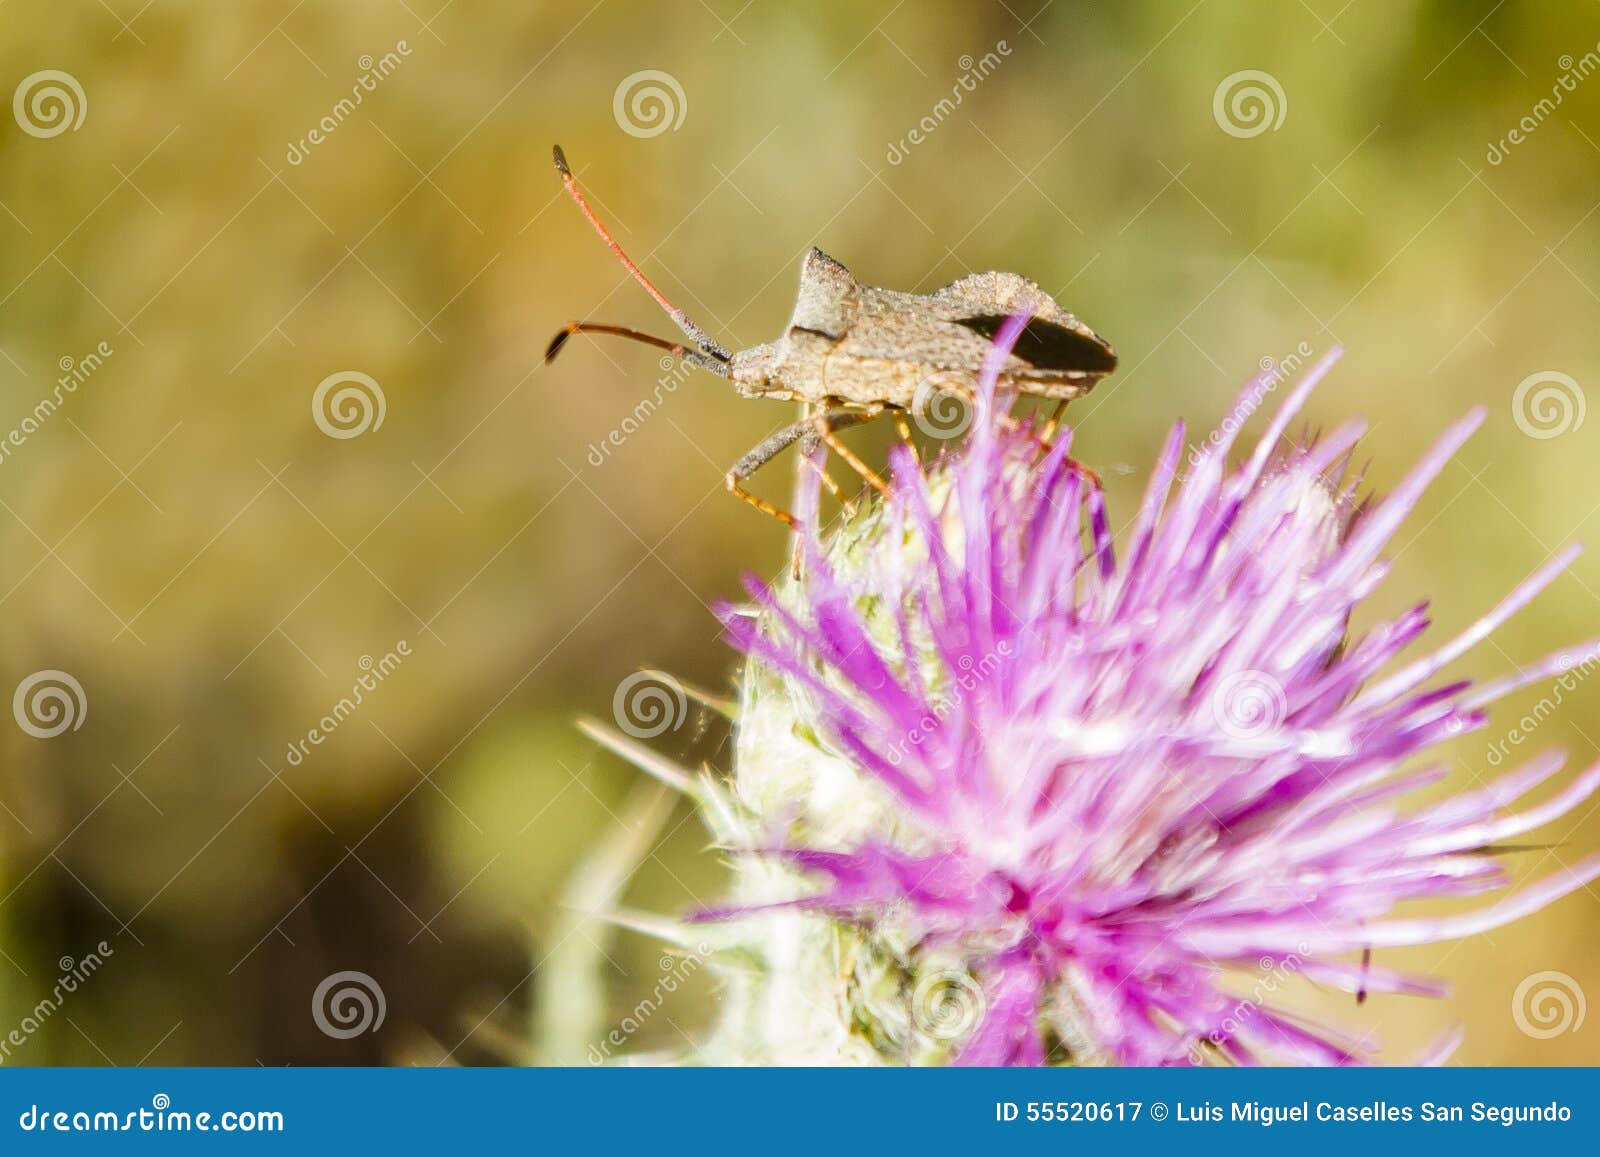 flower with insect